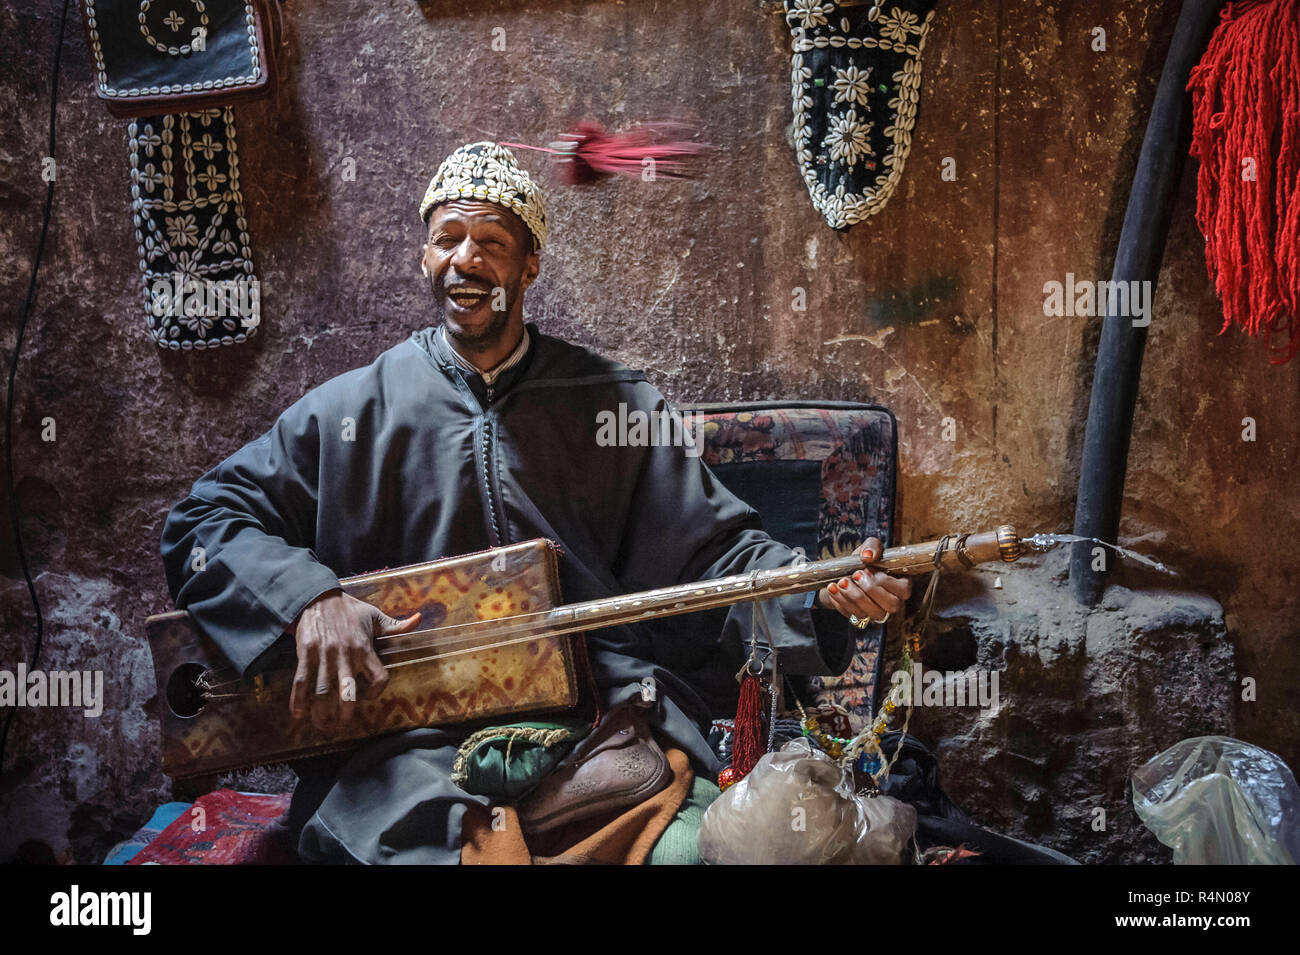 18-04-11. Marrakech, Morocco. A musician sitting cross legged and playing a traditional three stringed guembri musical instrument. He wears a fez hat Stock Photo